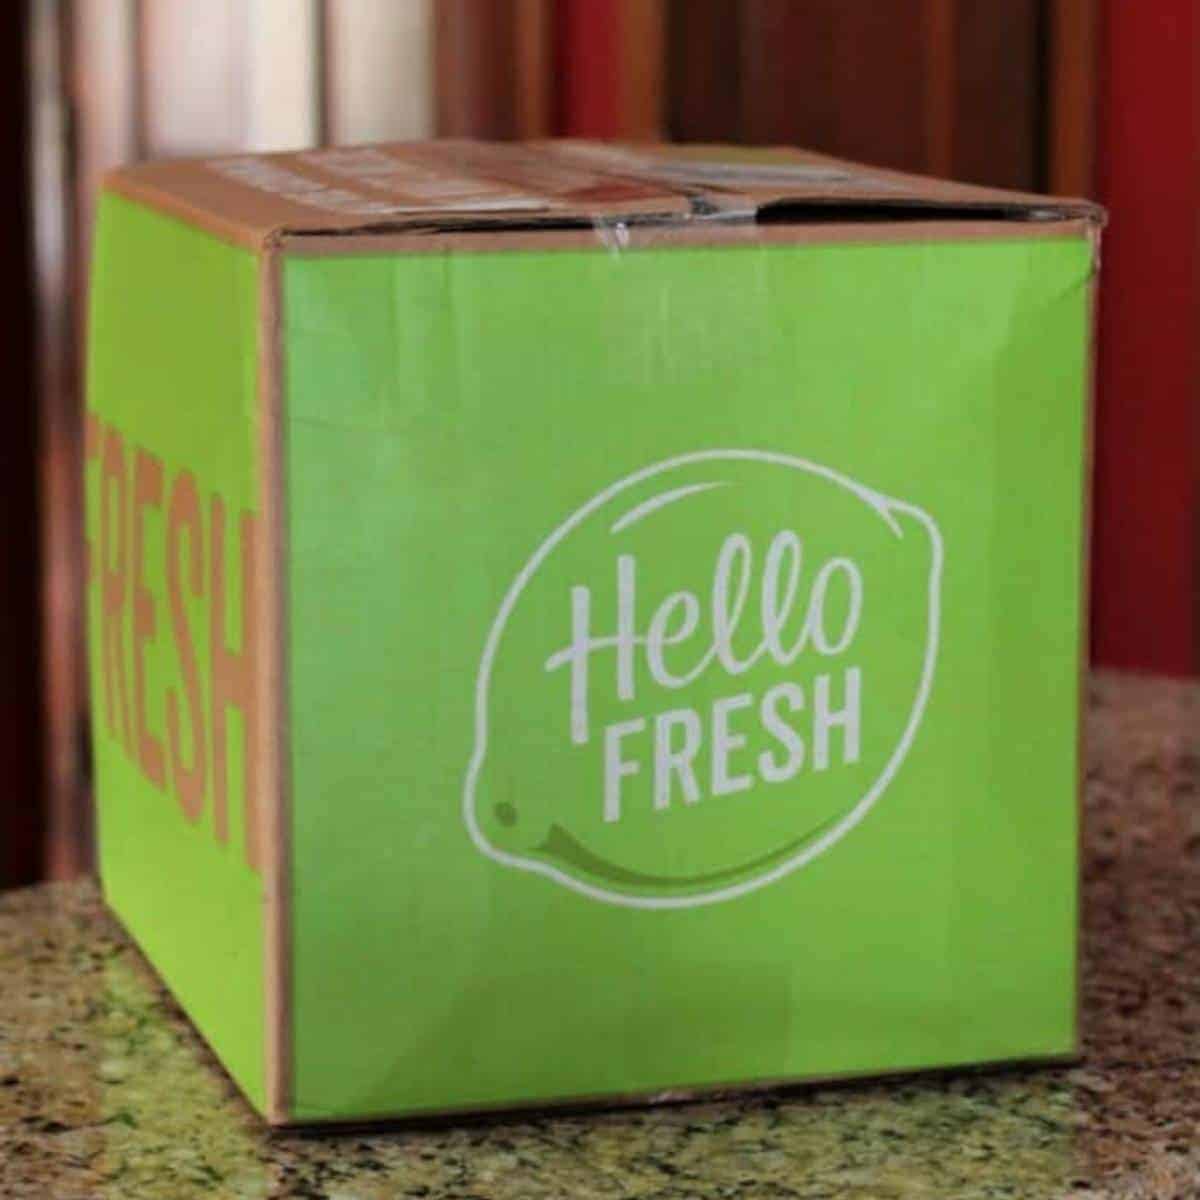 hello fresh review. An honest review of hello fresh recipes and whether or not it's a good fit for your family.